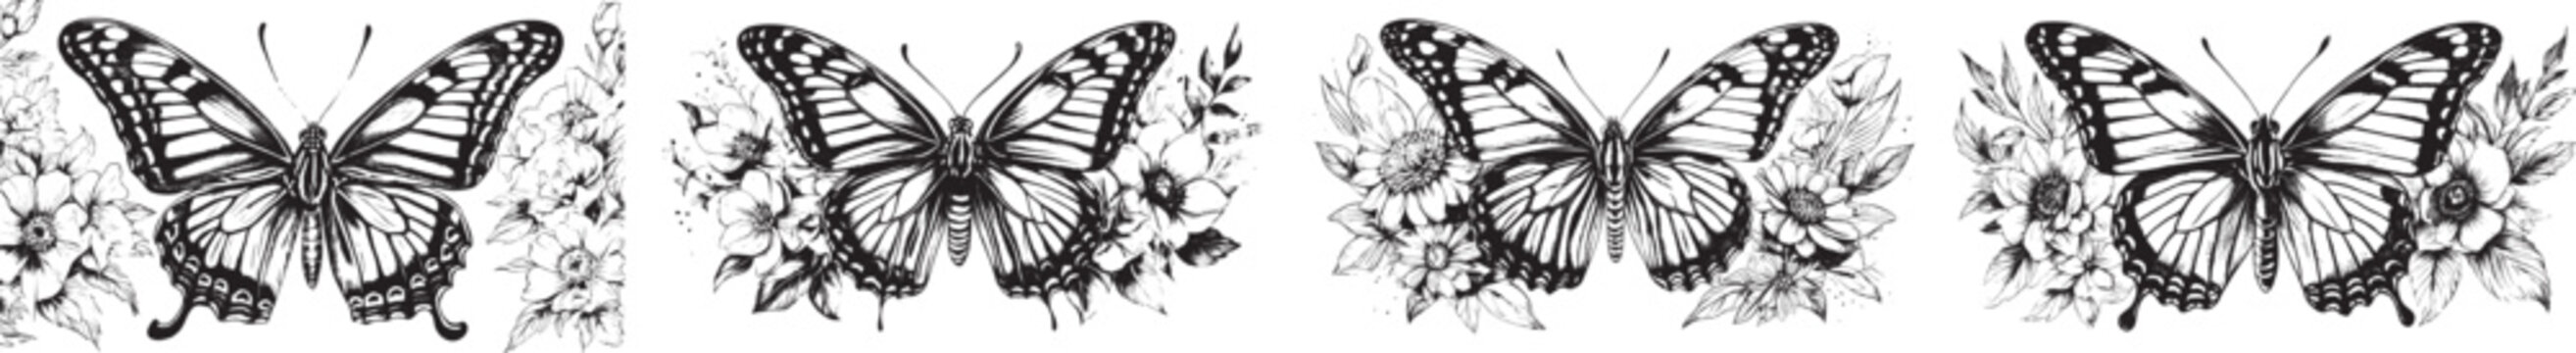 Monarch butterfly with flower silhouettes collection vector illustration isolated on white background.